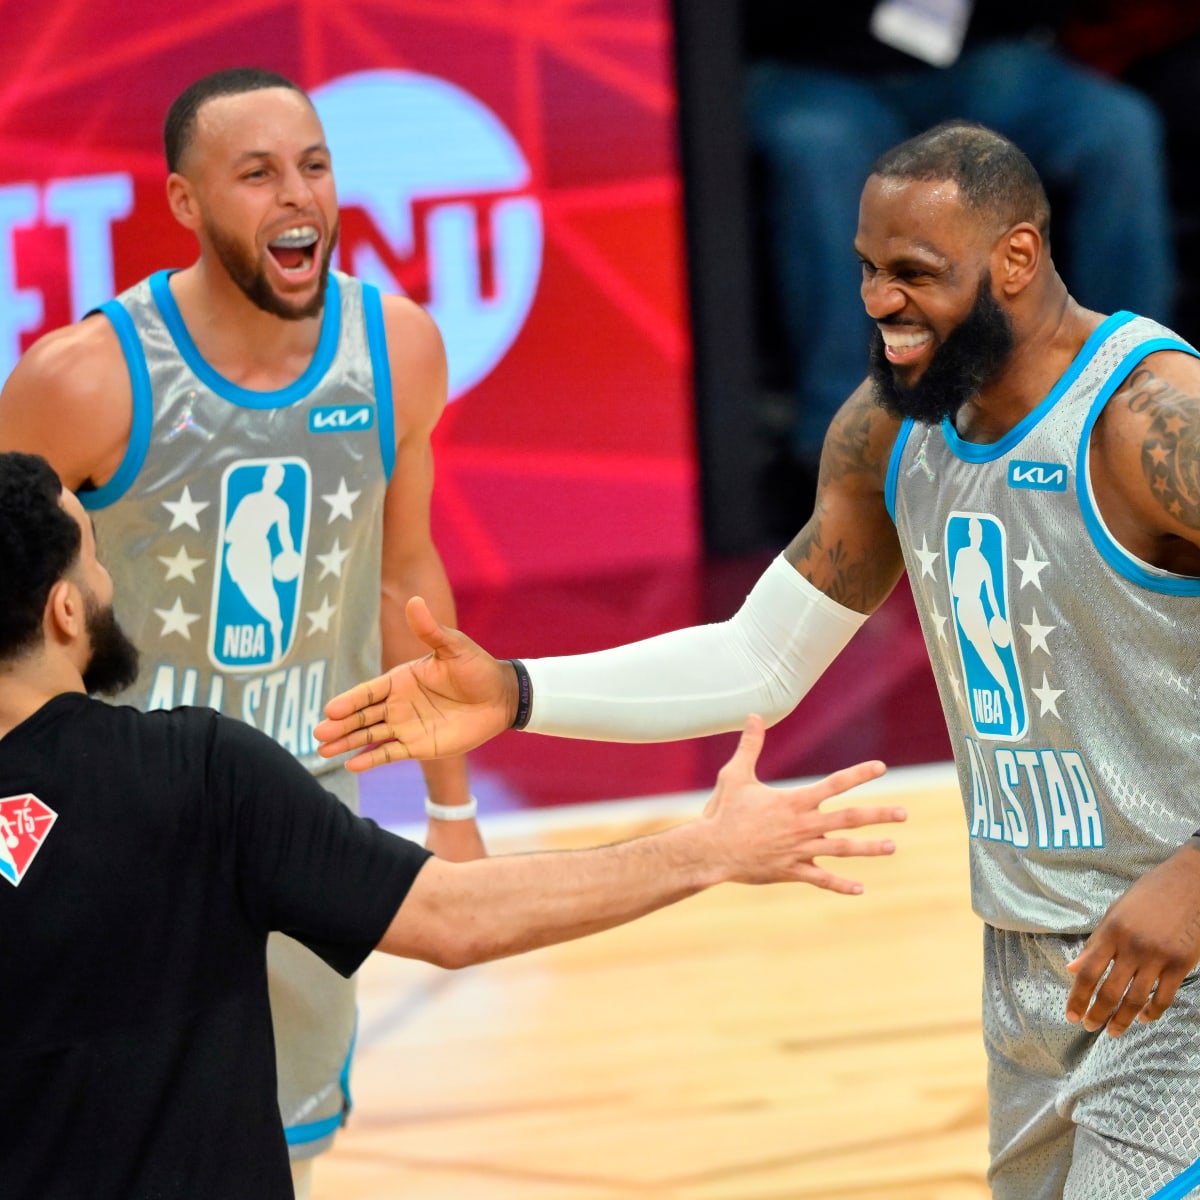 2022 NBA All-Star Game: Stephen Curry sets a record, and LeBron